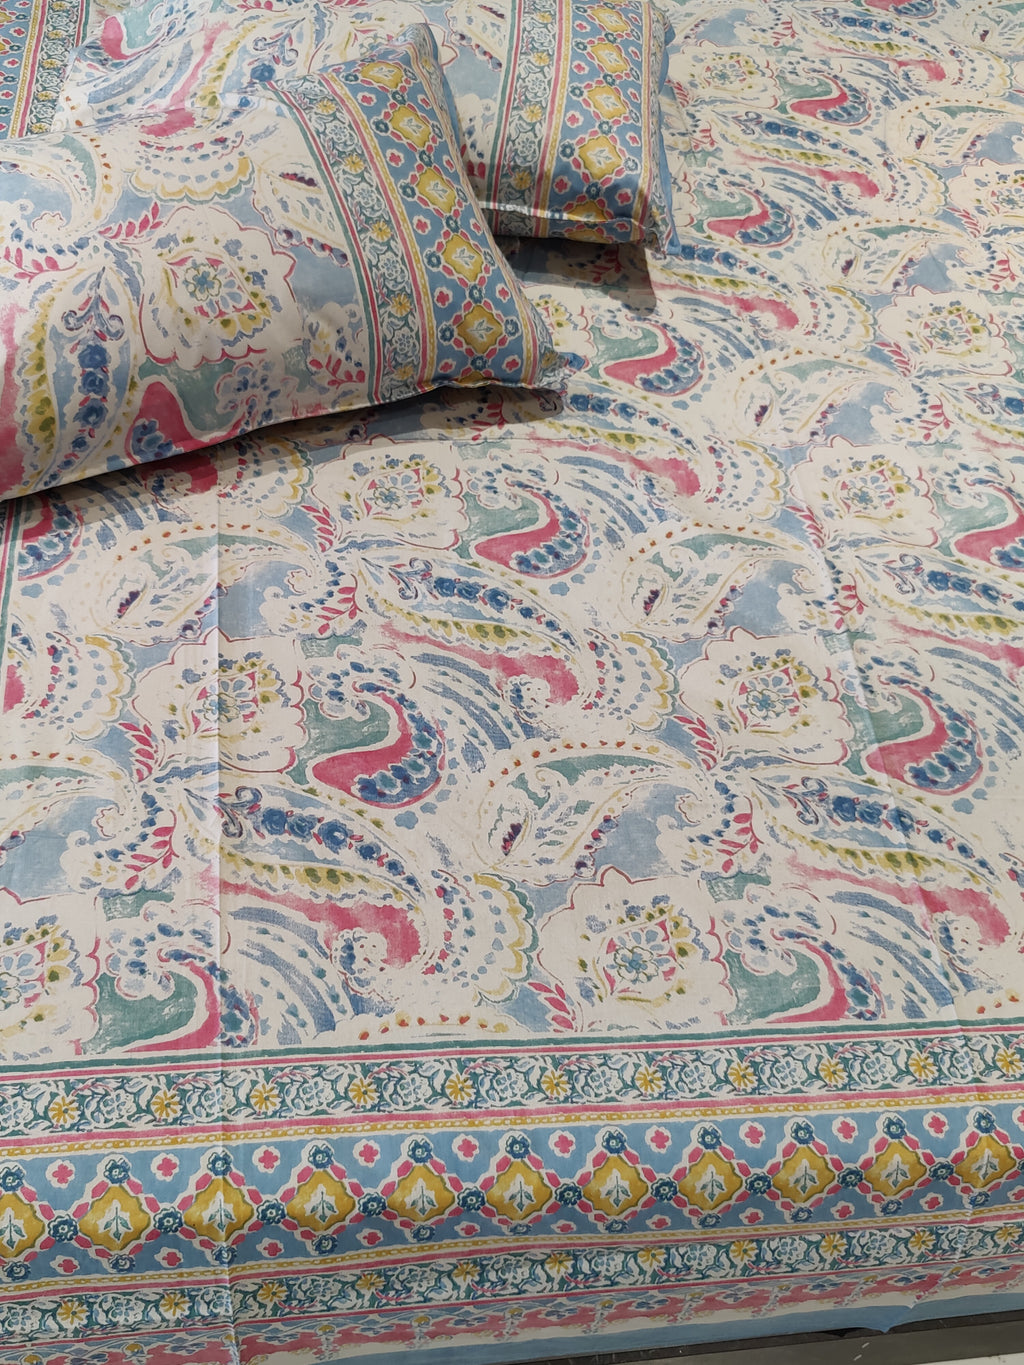 SHALIMAR BEDSHEET WITH TWO REVERSIBLE PILLOW COVERS